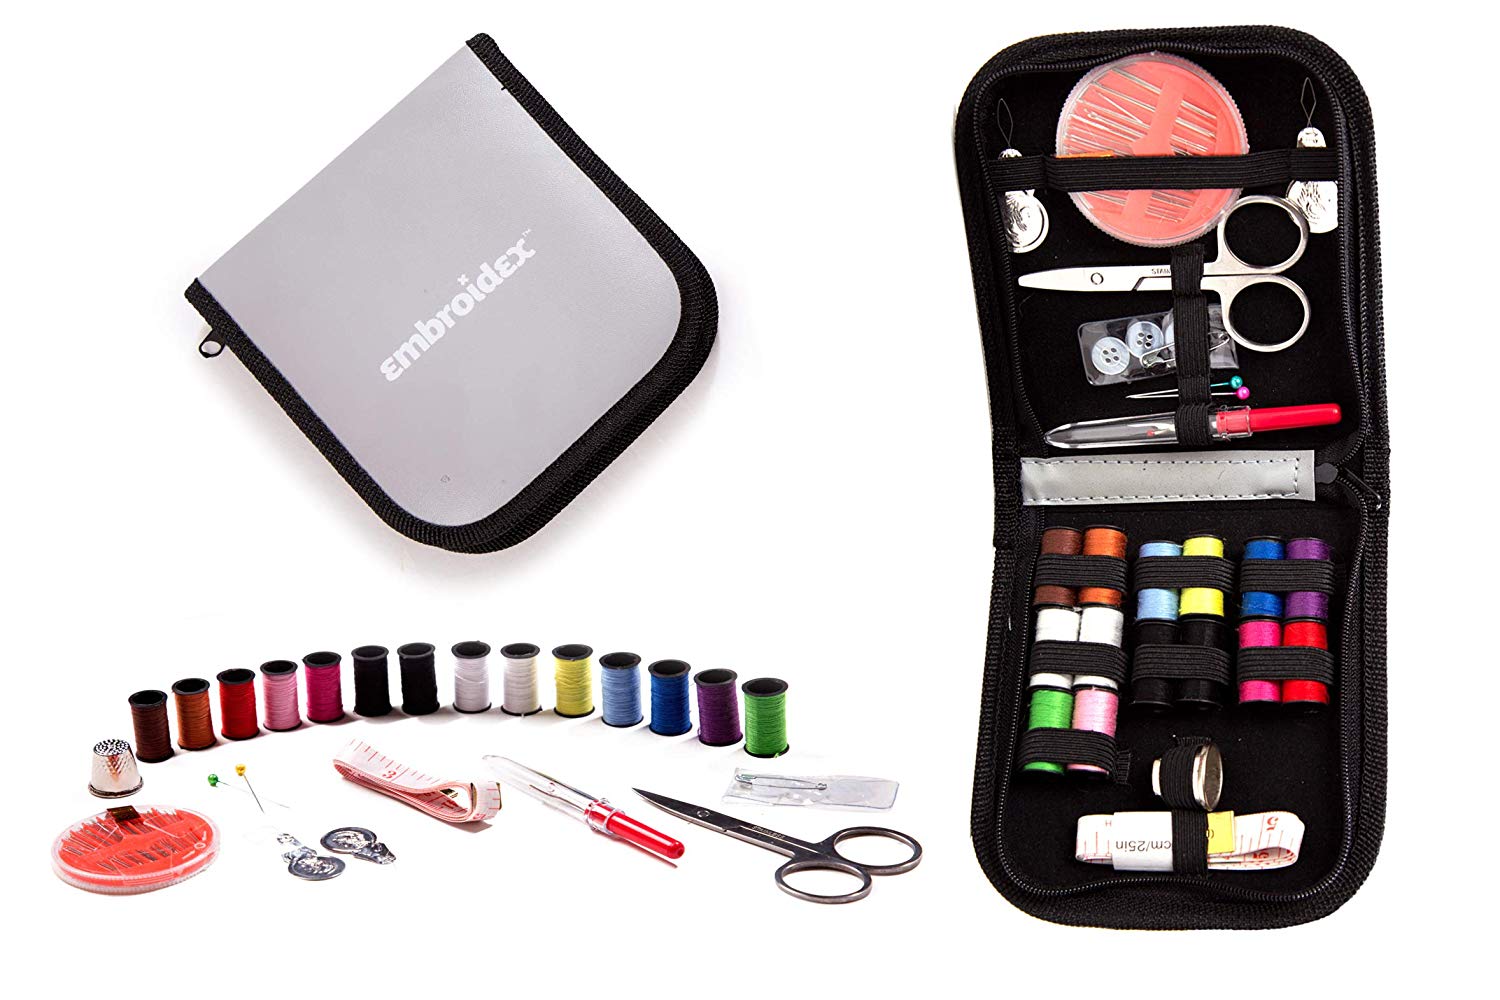 Sewing Kit for Home $5.99 ($19.99)